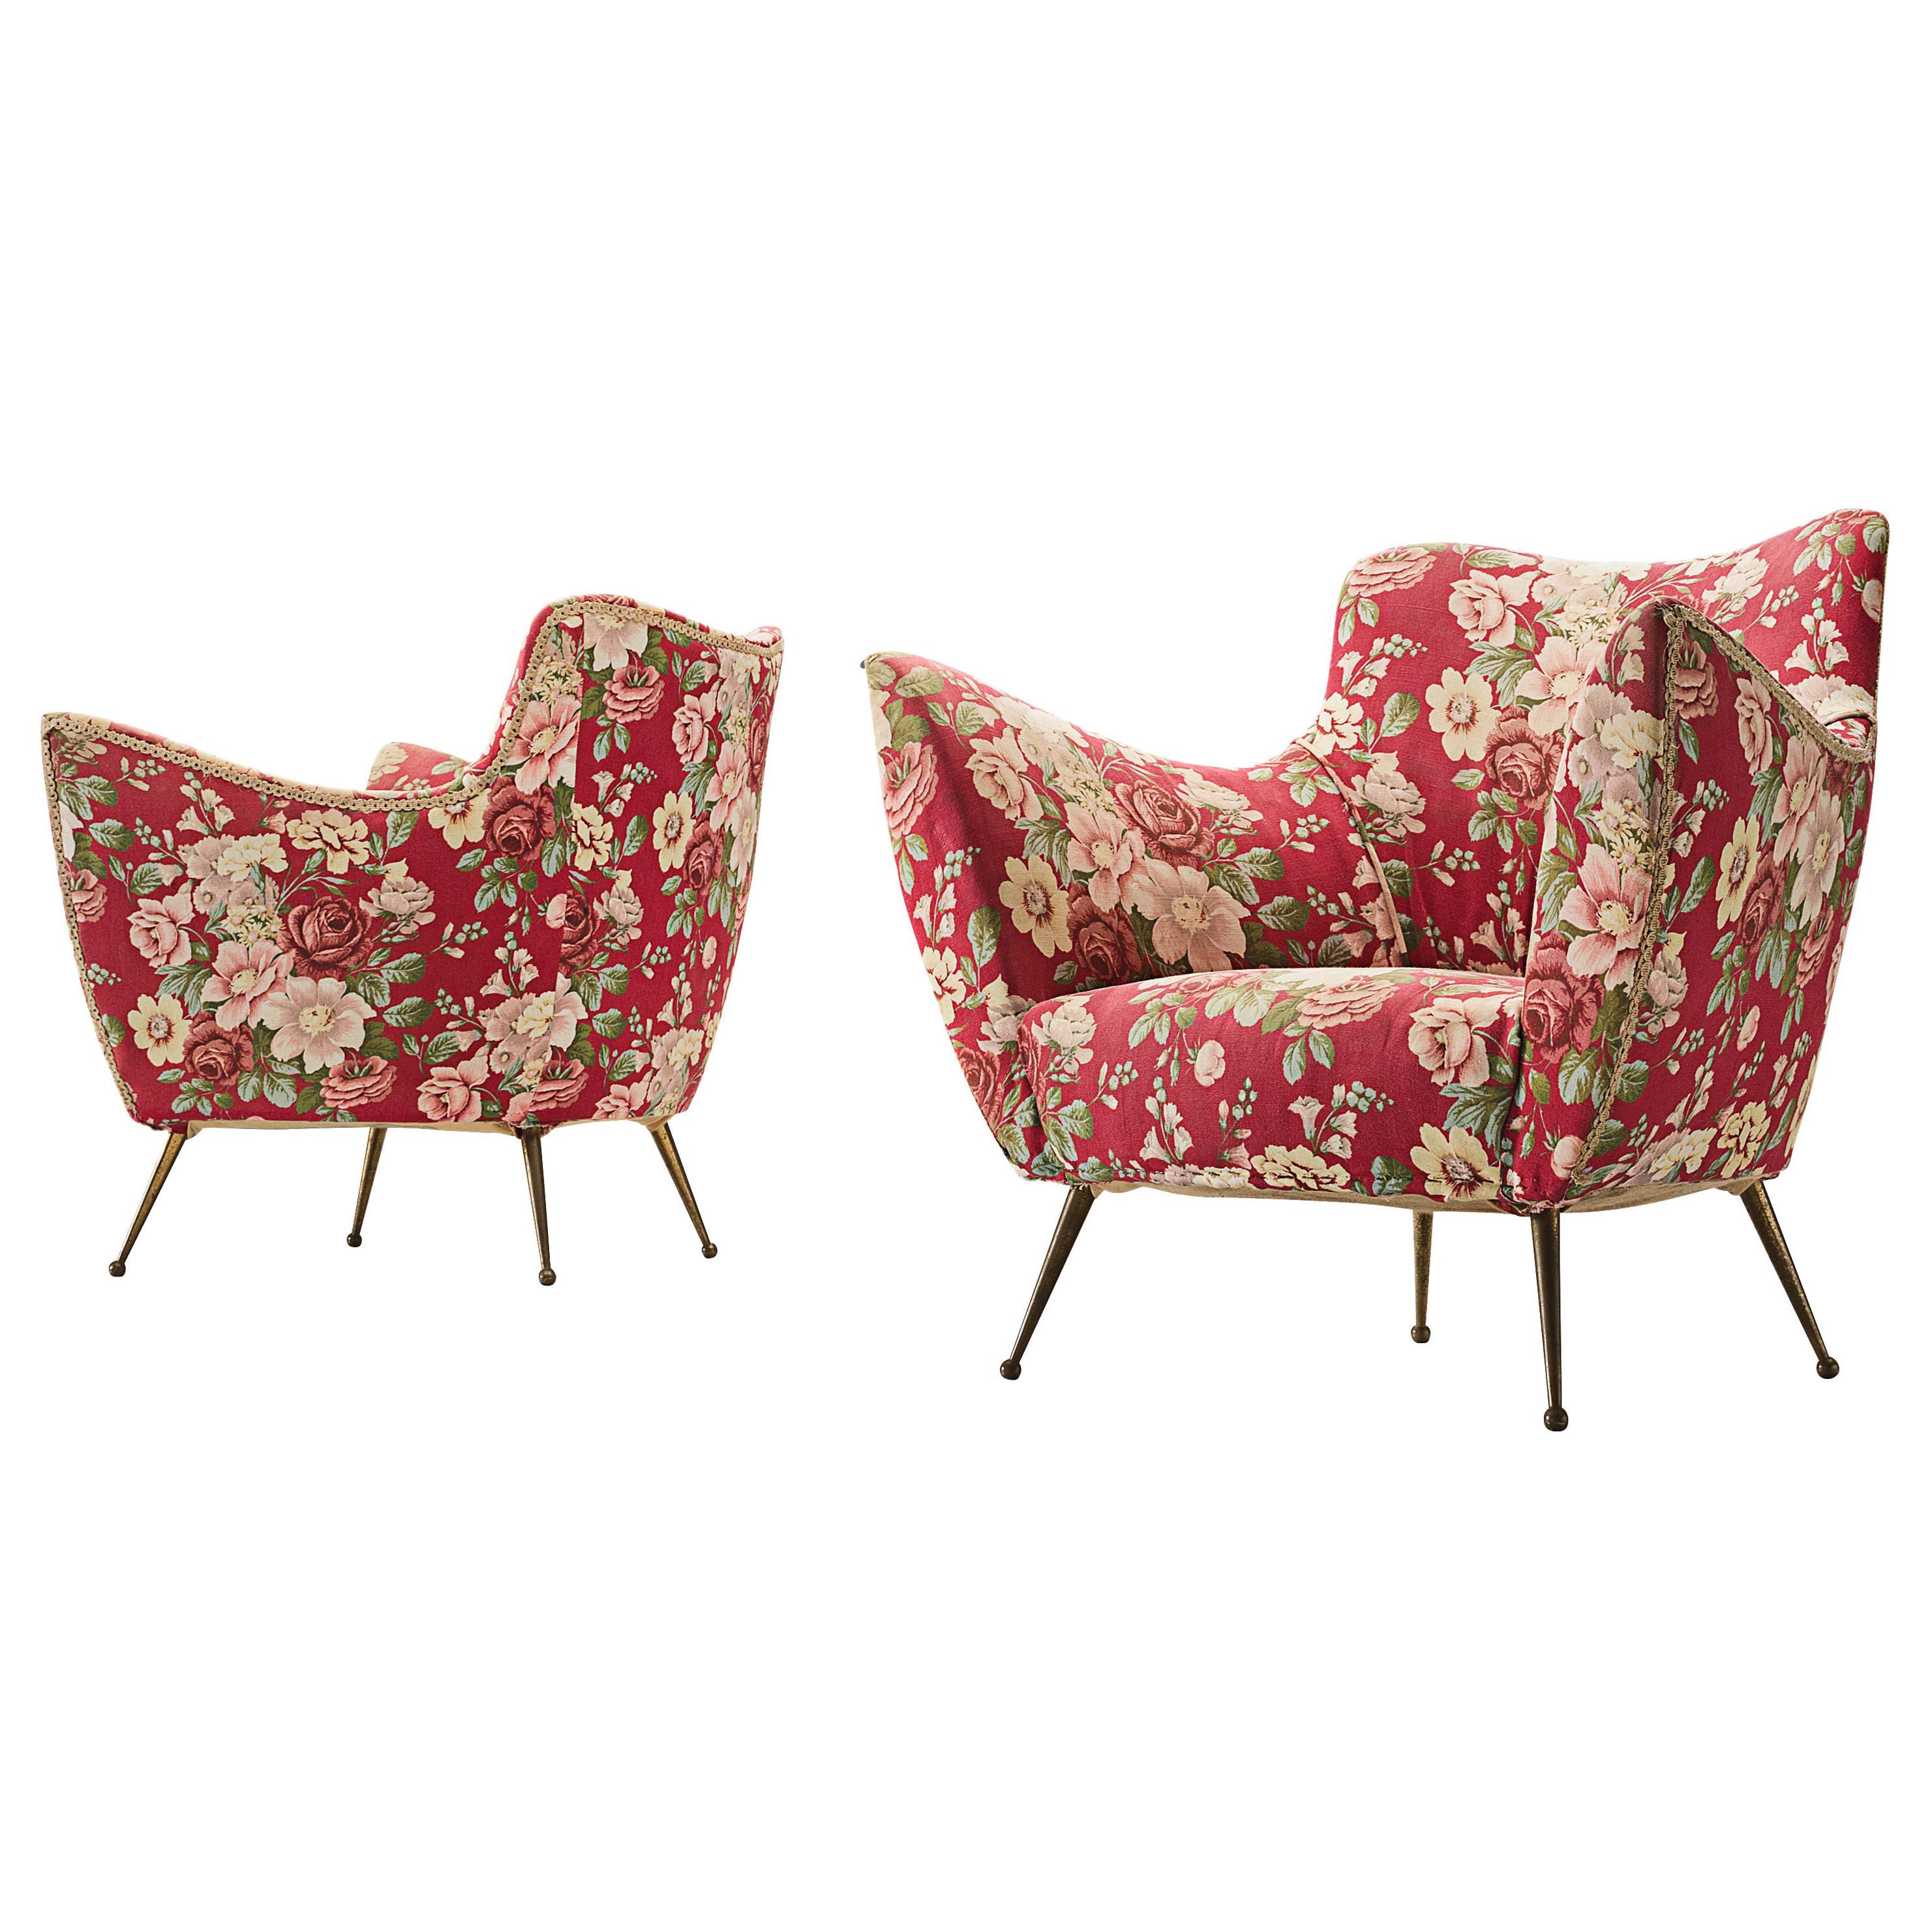 Pair of Italian Lounge Chairs with Red Floral Upholstery